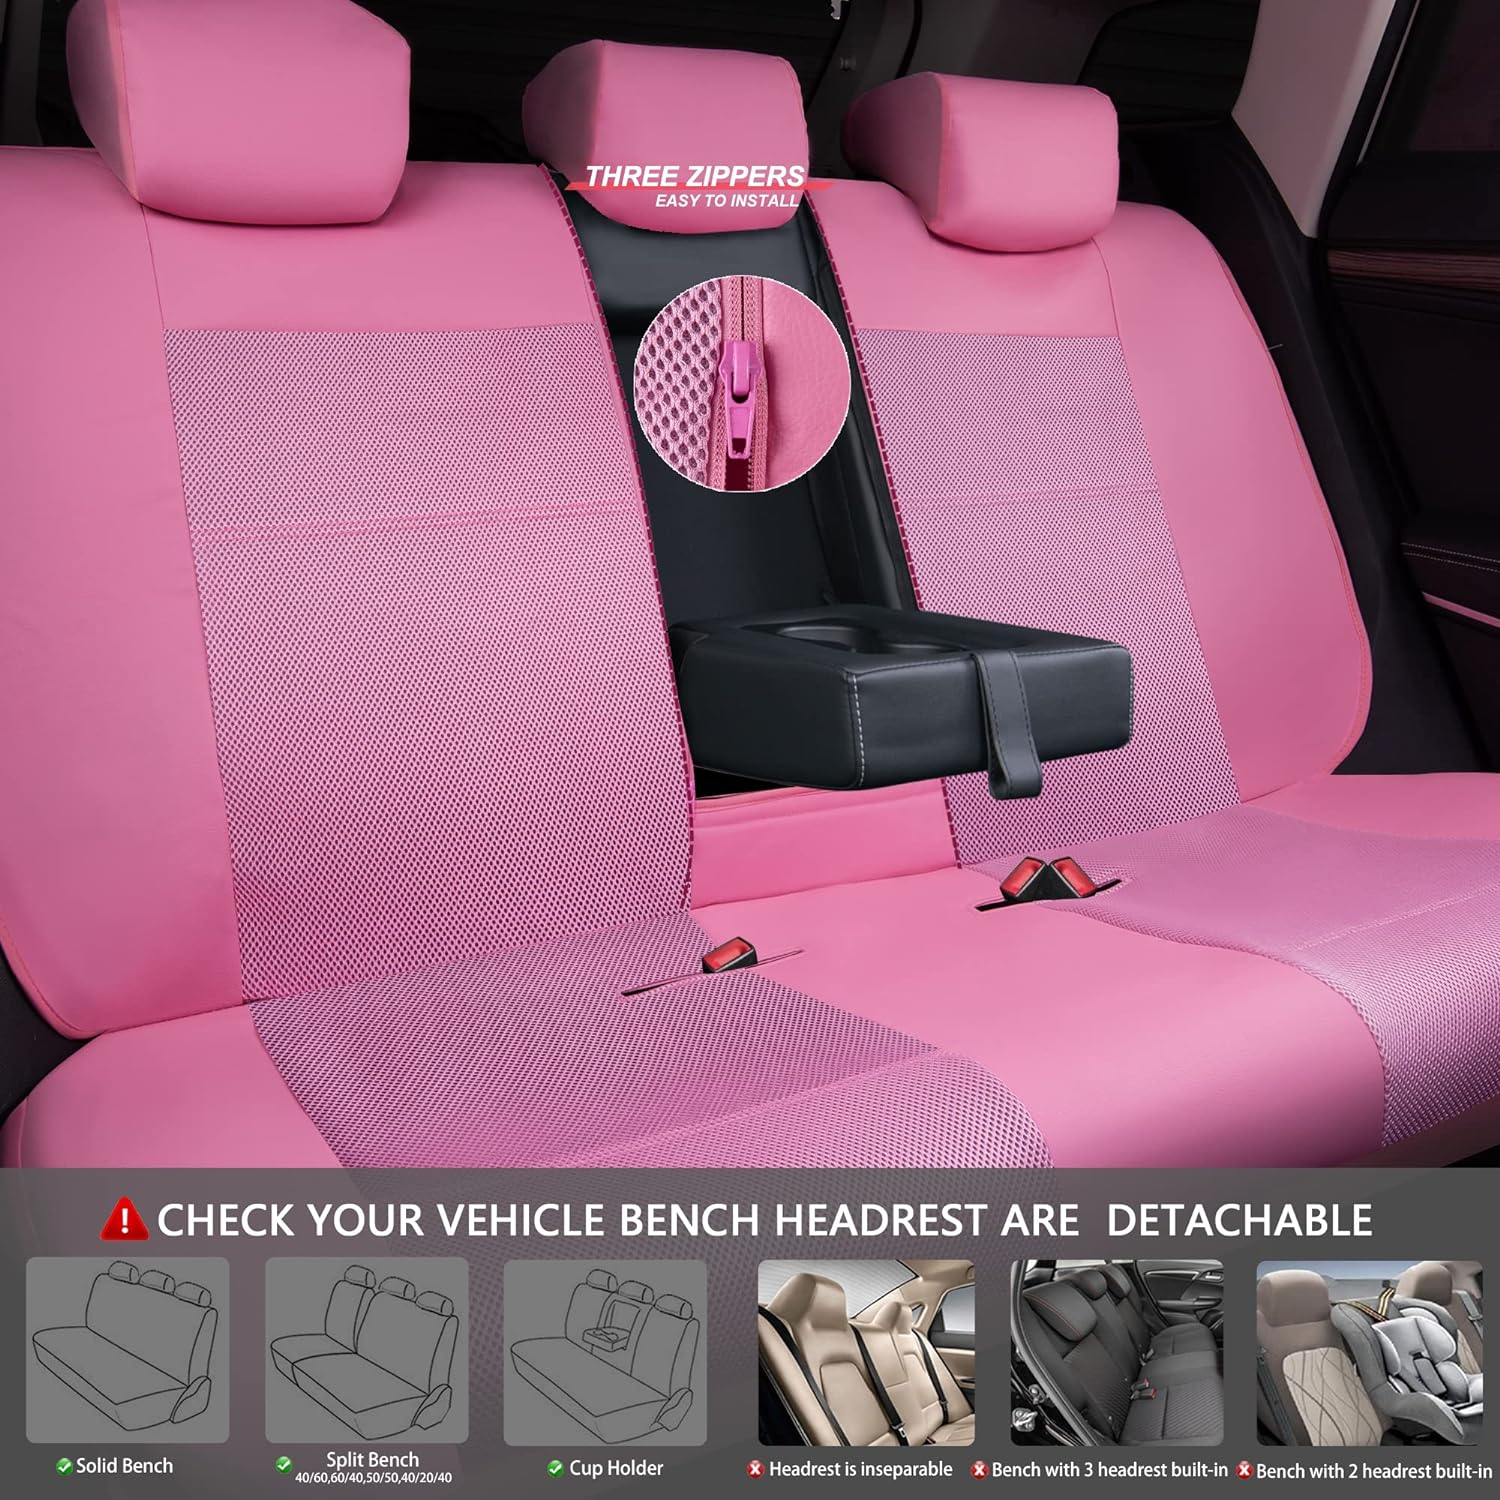 CAR PASS Barbie Pink Leather Seat Cover Automotive Breathable Universal Car Seat Cover Set Package-Super 5mm Sponge Inside,Airbag Compatible, Interior Cover Cute for Women Car Truck Van (Pink)